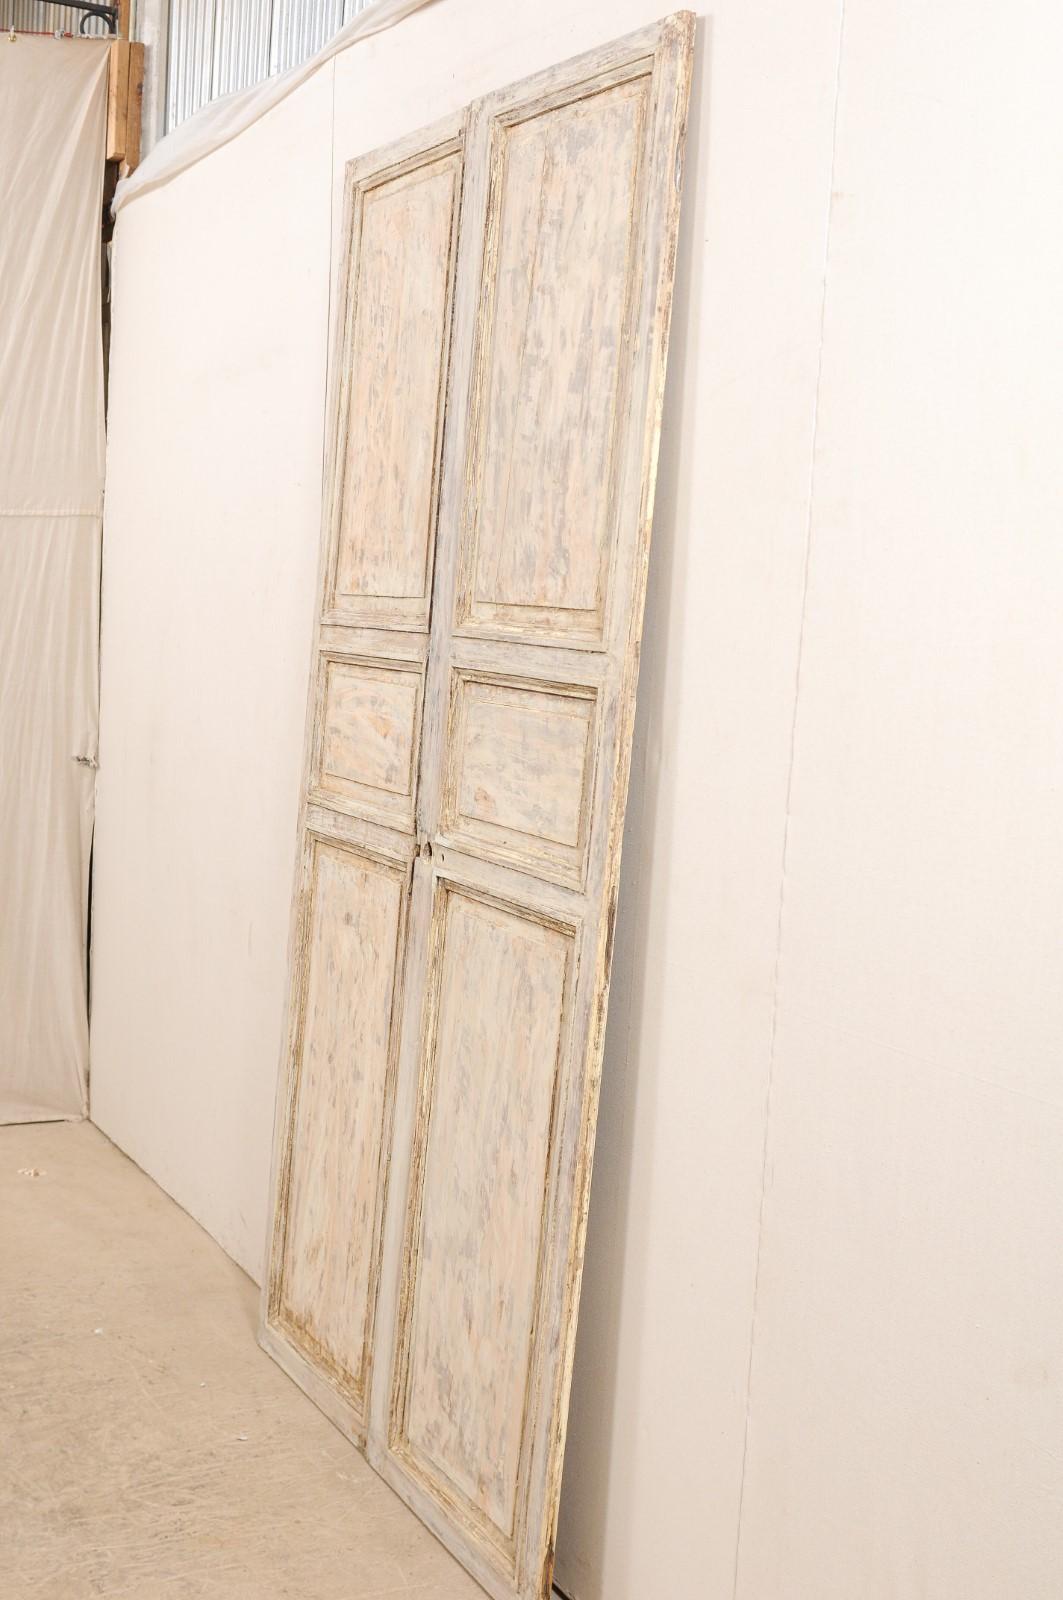 Pair of 19th Century French Painted Wood Doors with Lovely Cream Colored Finish 3